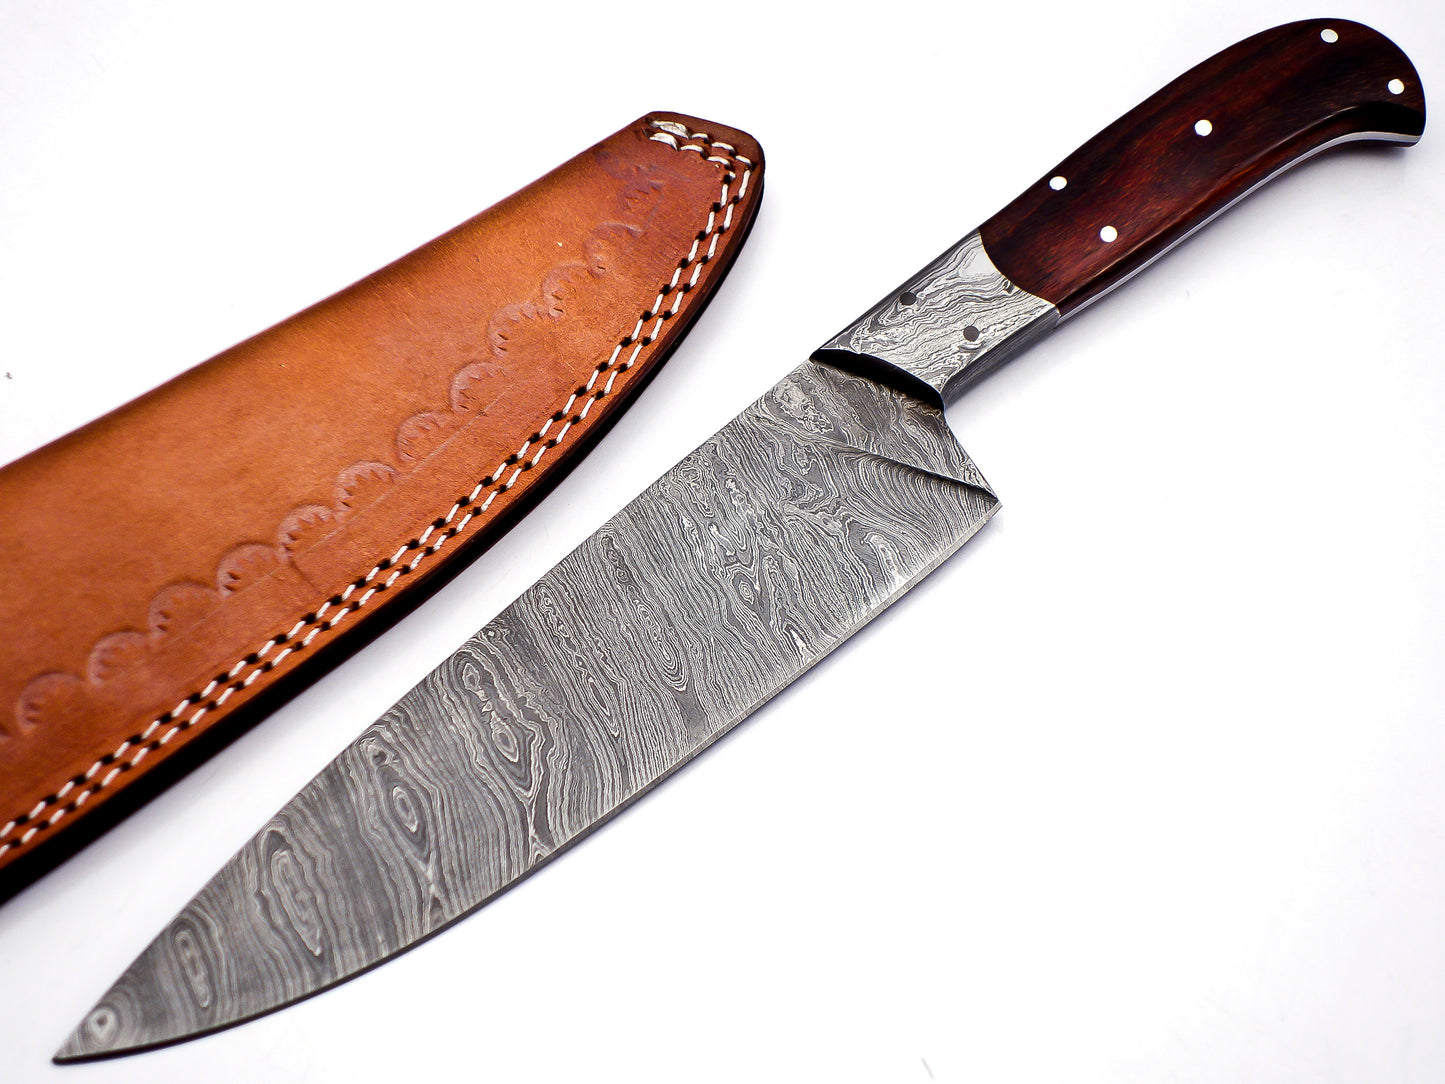 "Premium Rosewood Handle Full Tang Damascus Steel Chef's Knife 12" With Leather Sheath